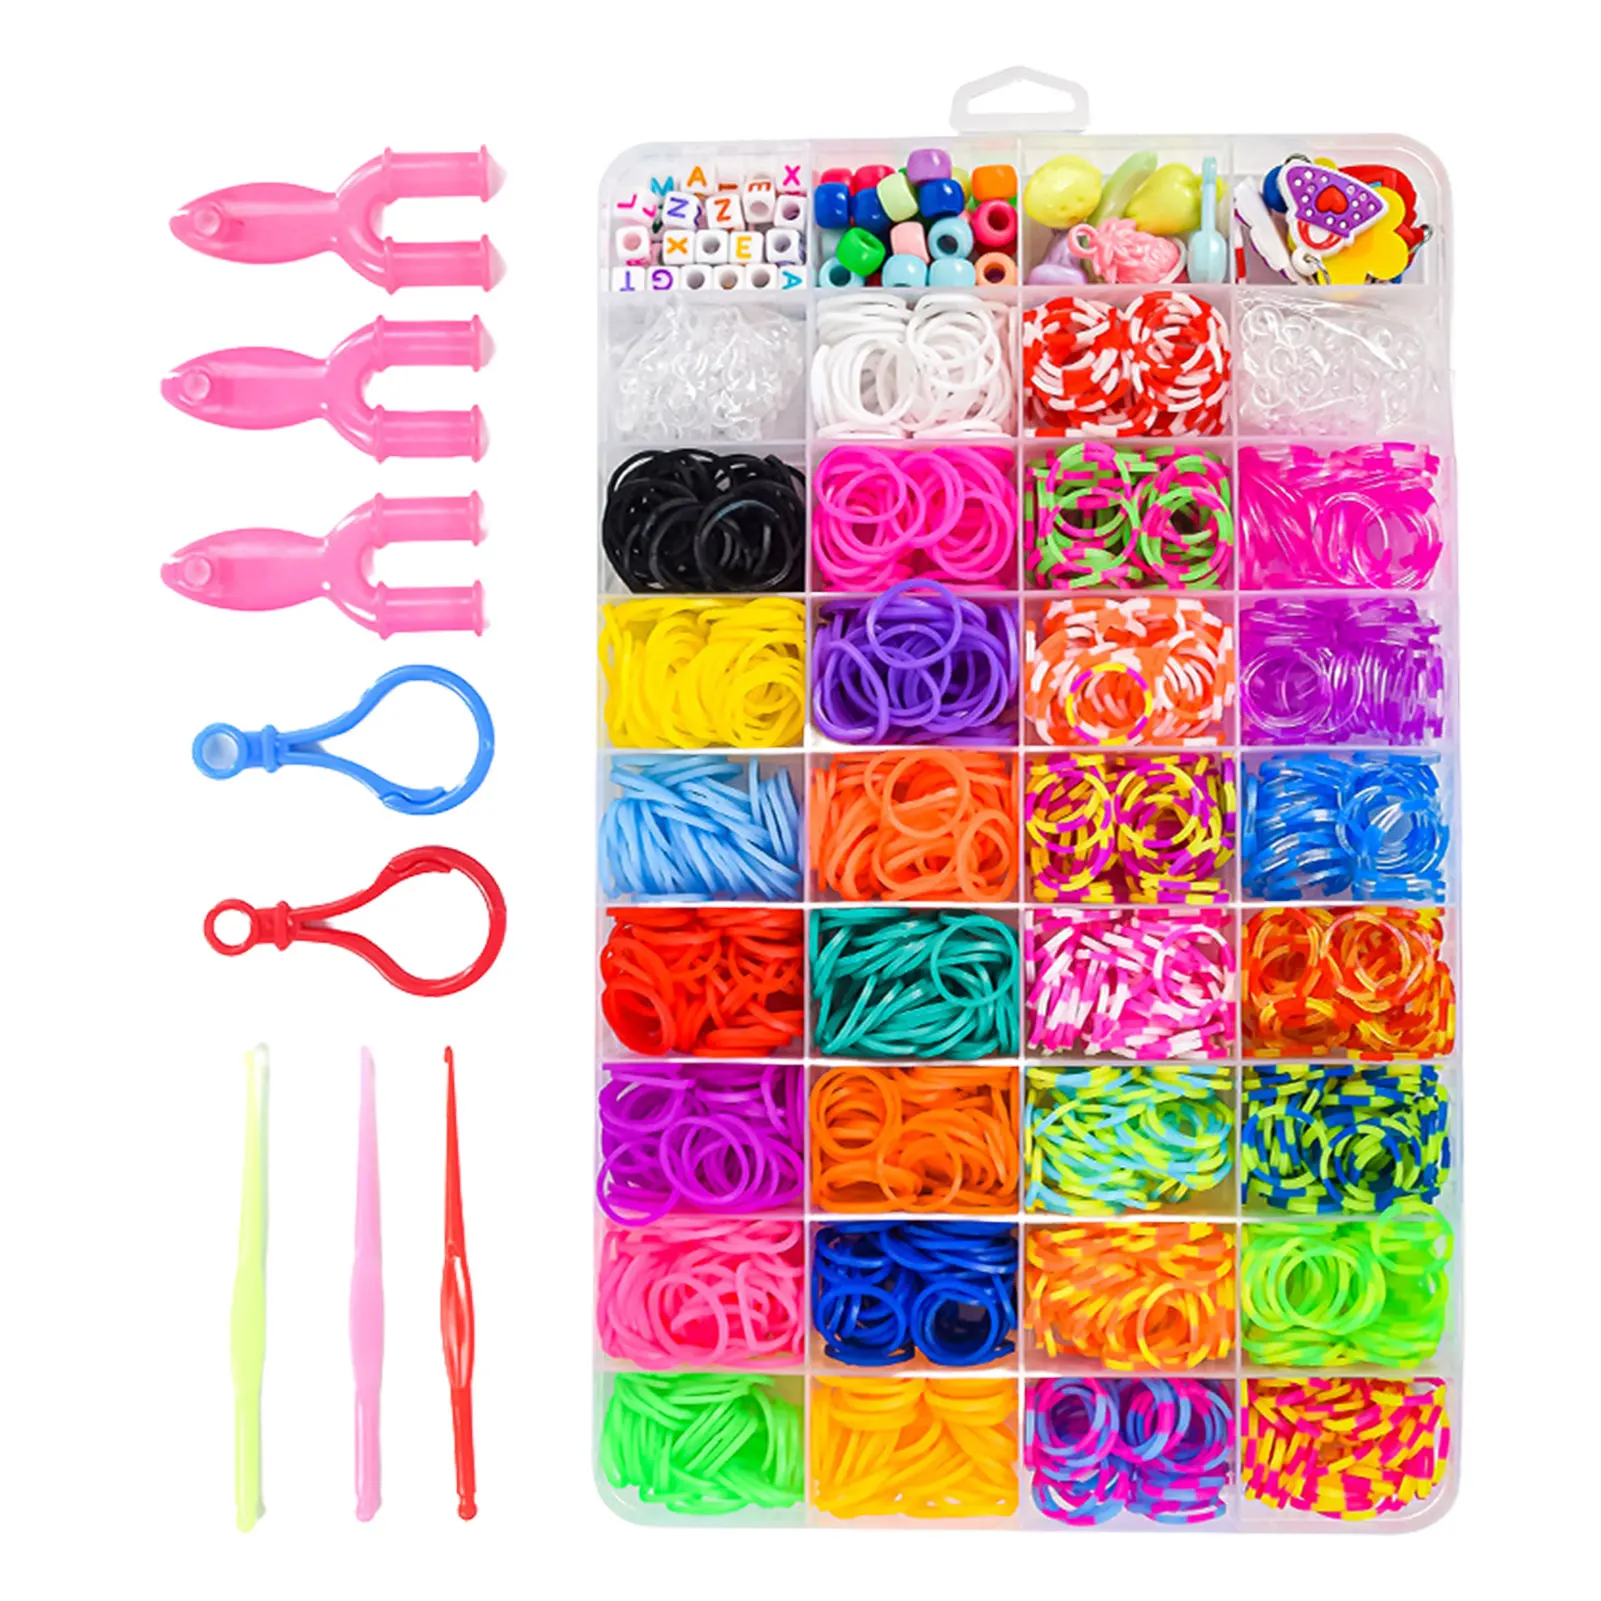 

Loom Band Refill Kit Colorful Rubber Loom Band Refill Kits 1400 30 Colors Loom Band Starter Set Craft Kit For Kids Friendship